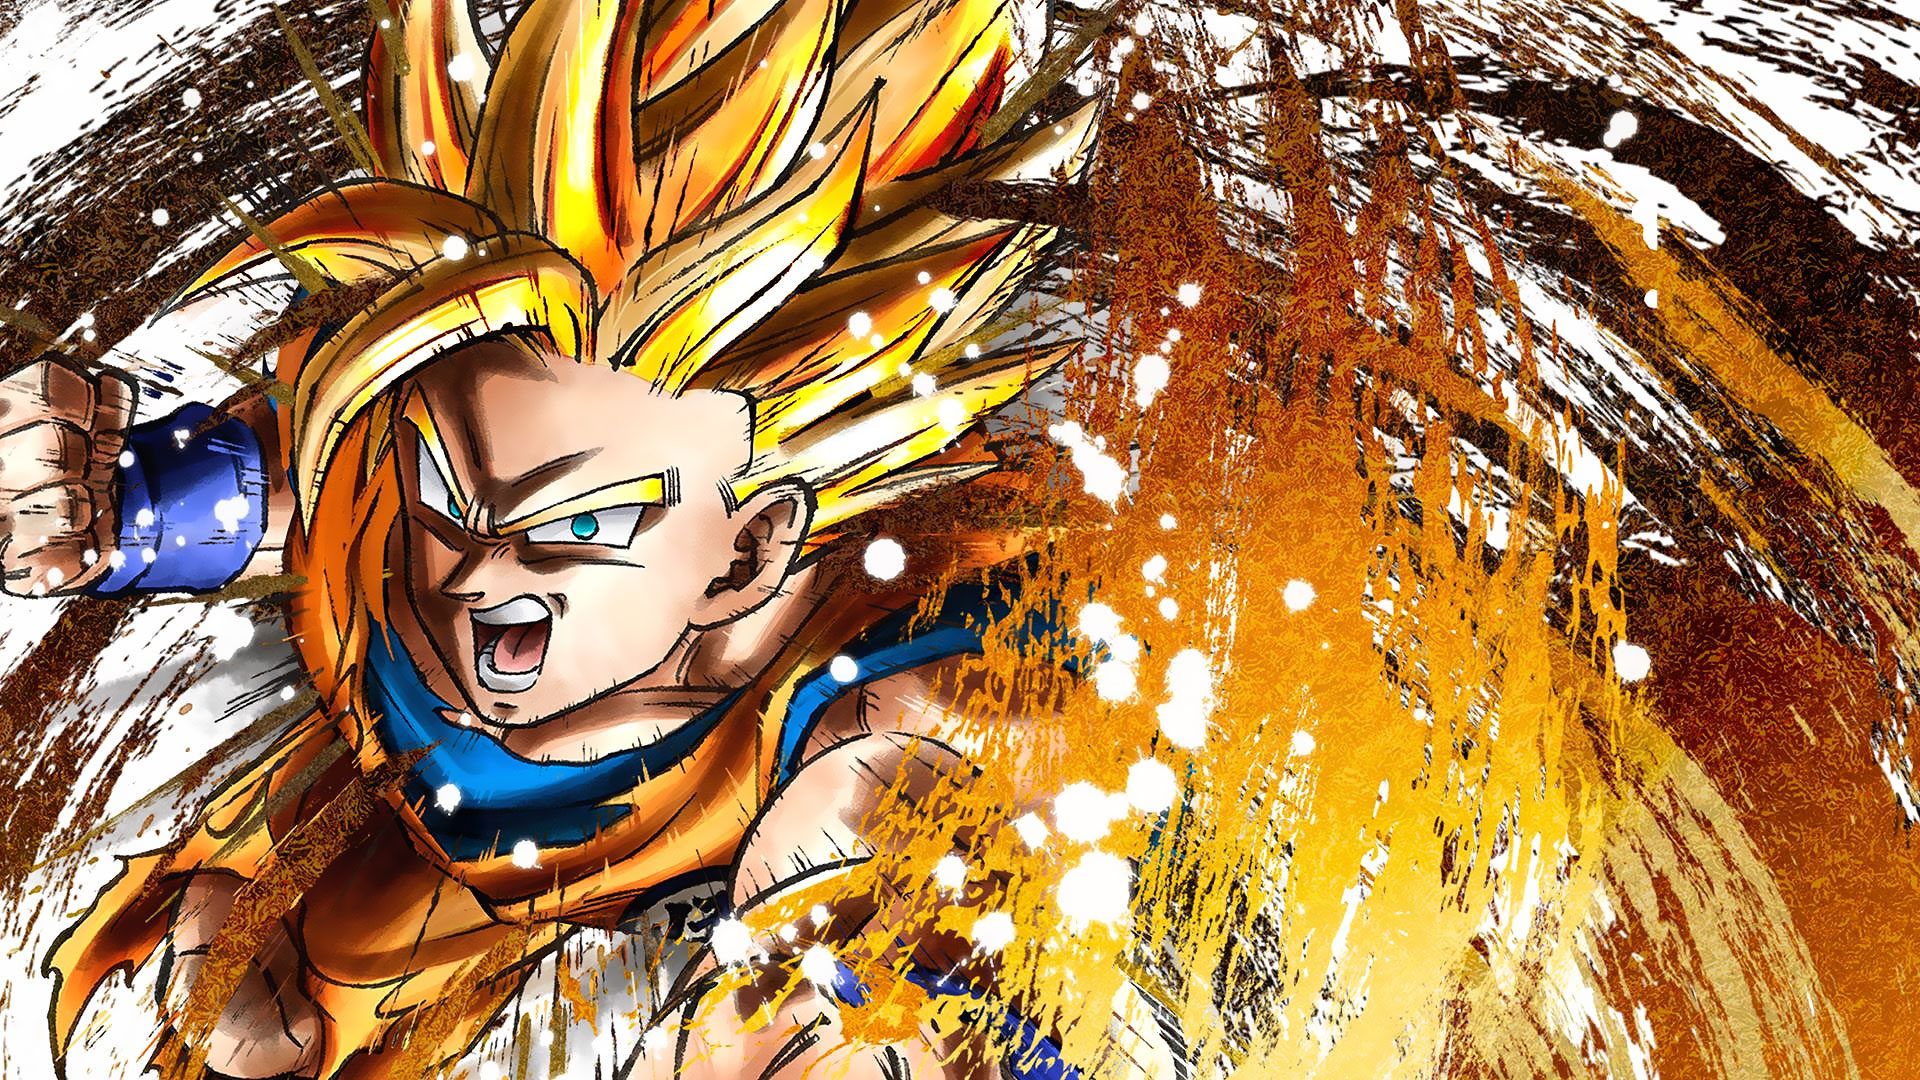 Best anime games: Dragon Ball FighterZ. Image shows Goku getting charged up.